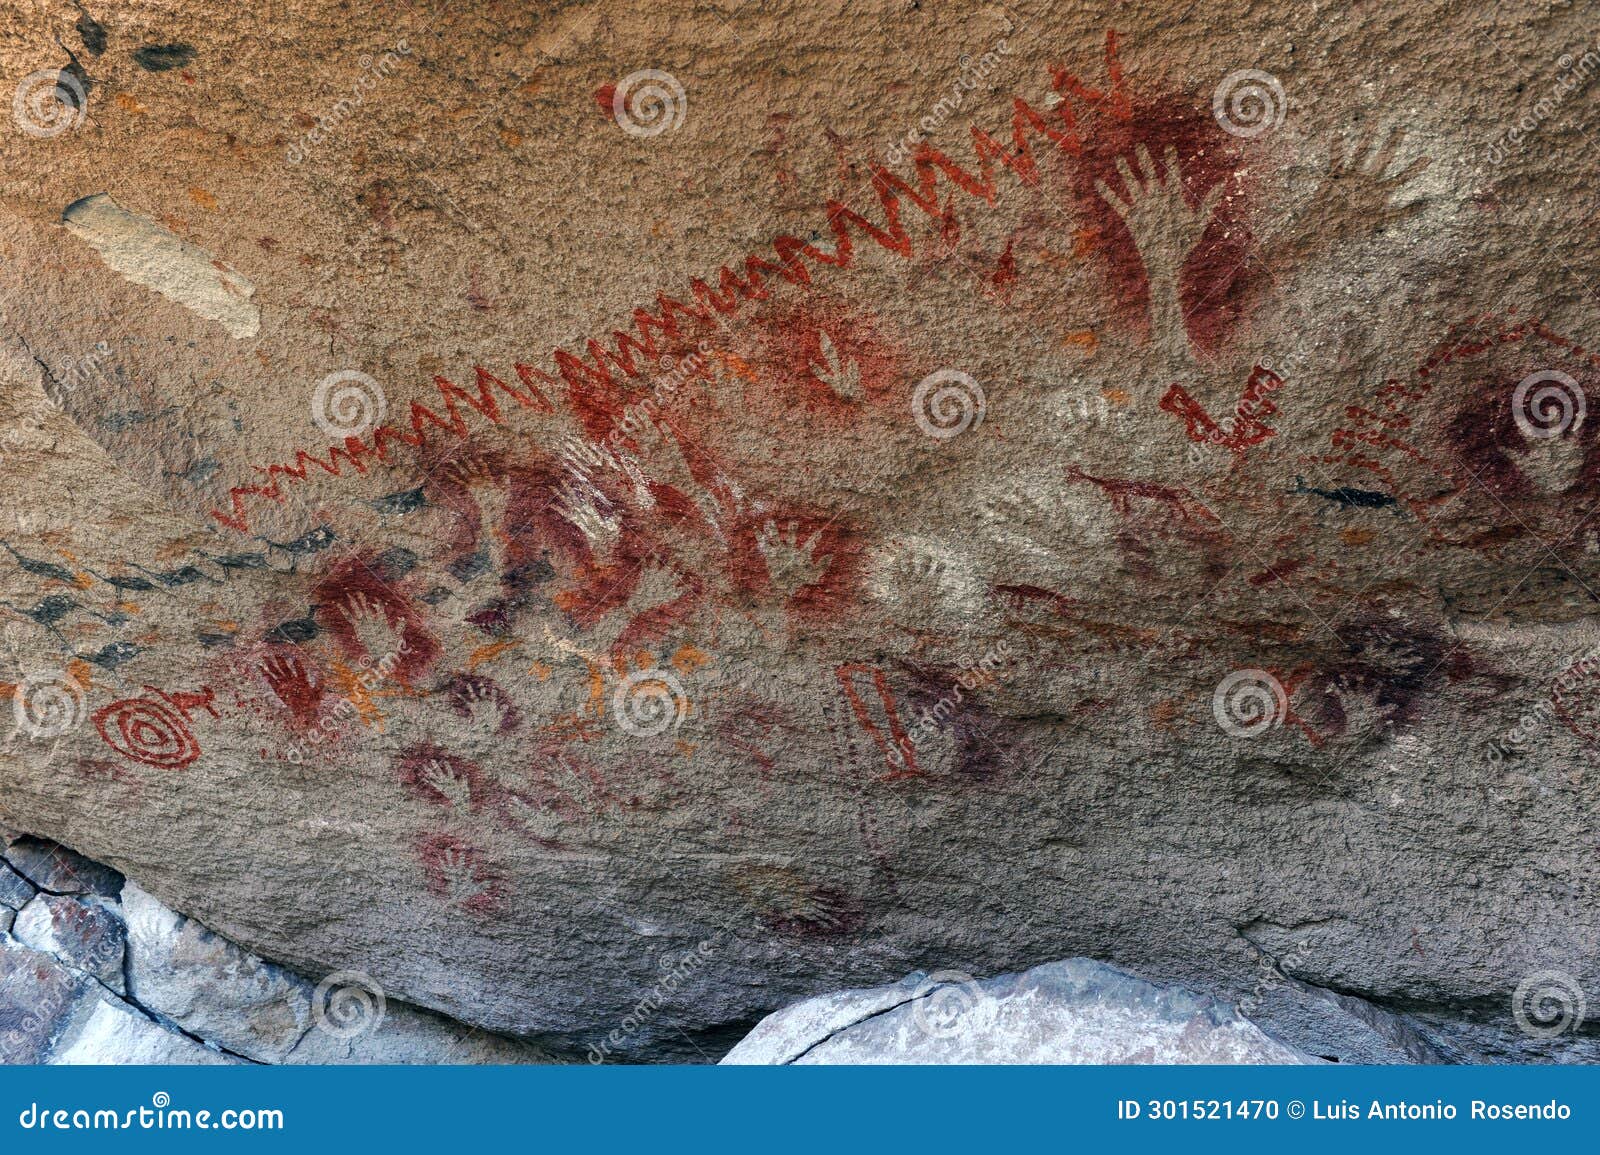 argentina the caves of the pinturas river keep works made by the tehuelche indians and their ancestors. its age is 9,